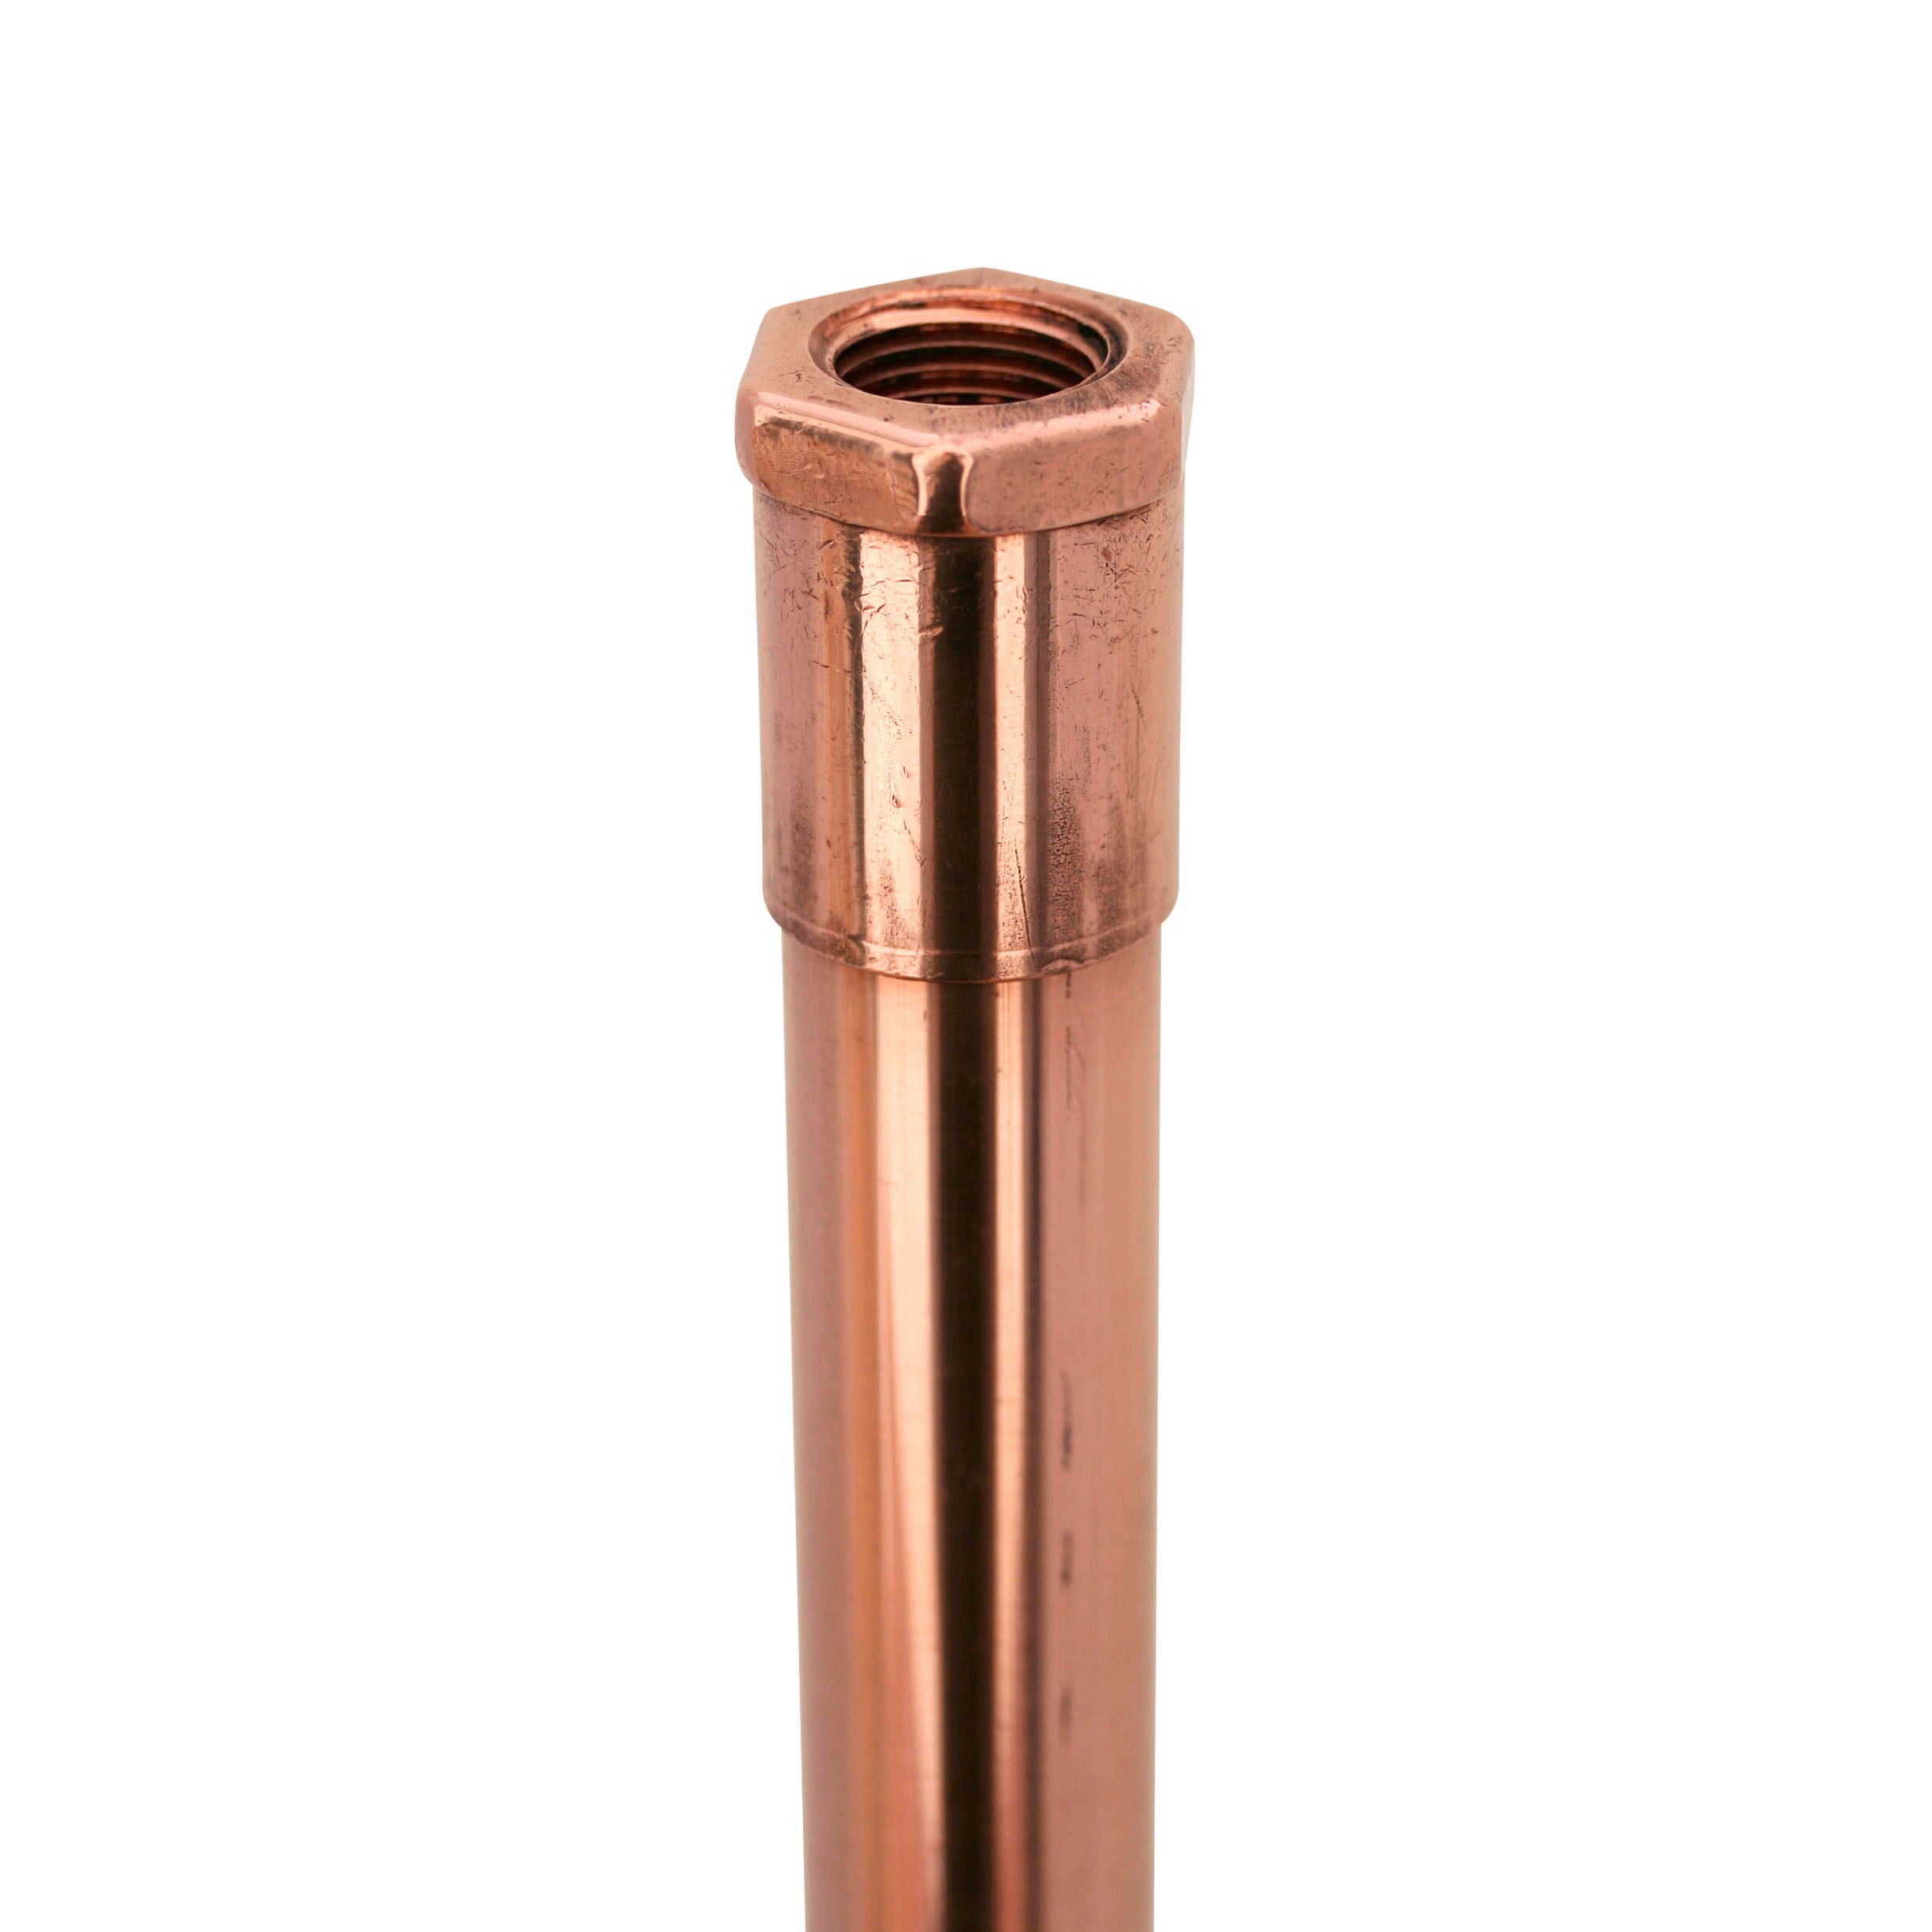 CopperMoon Custom Copper Stem ONLY for CM.9020 path light